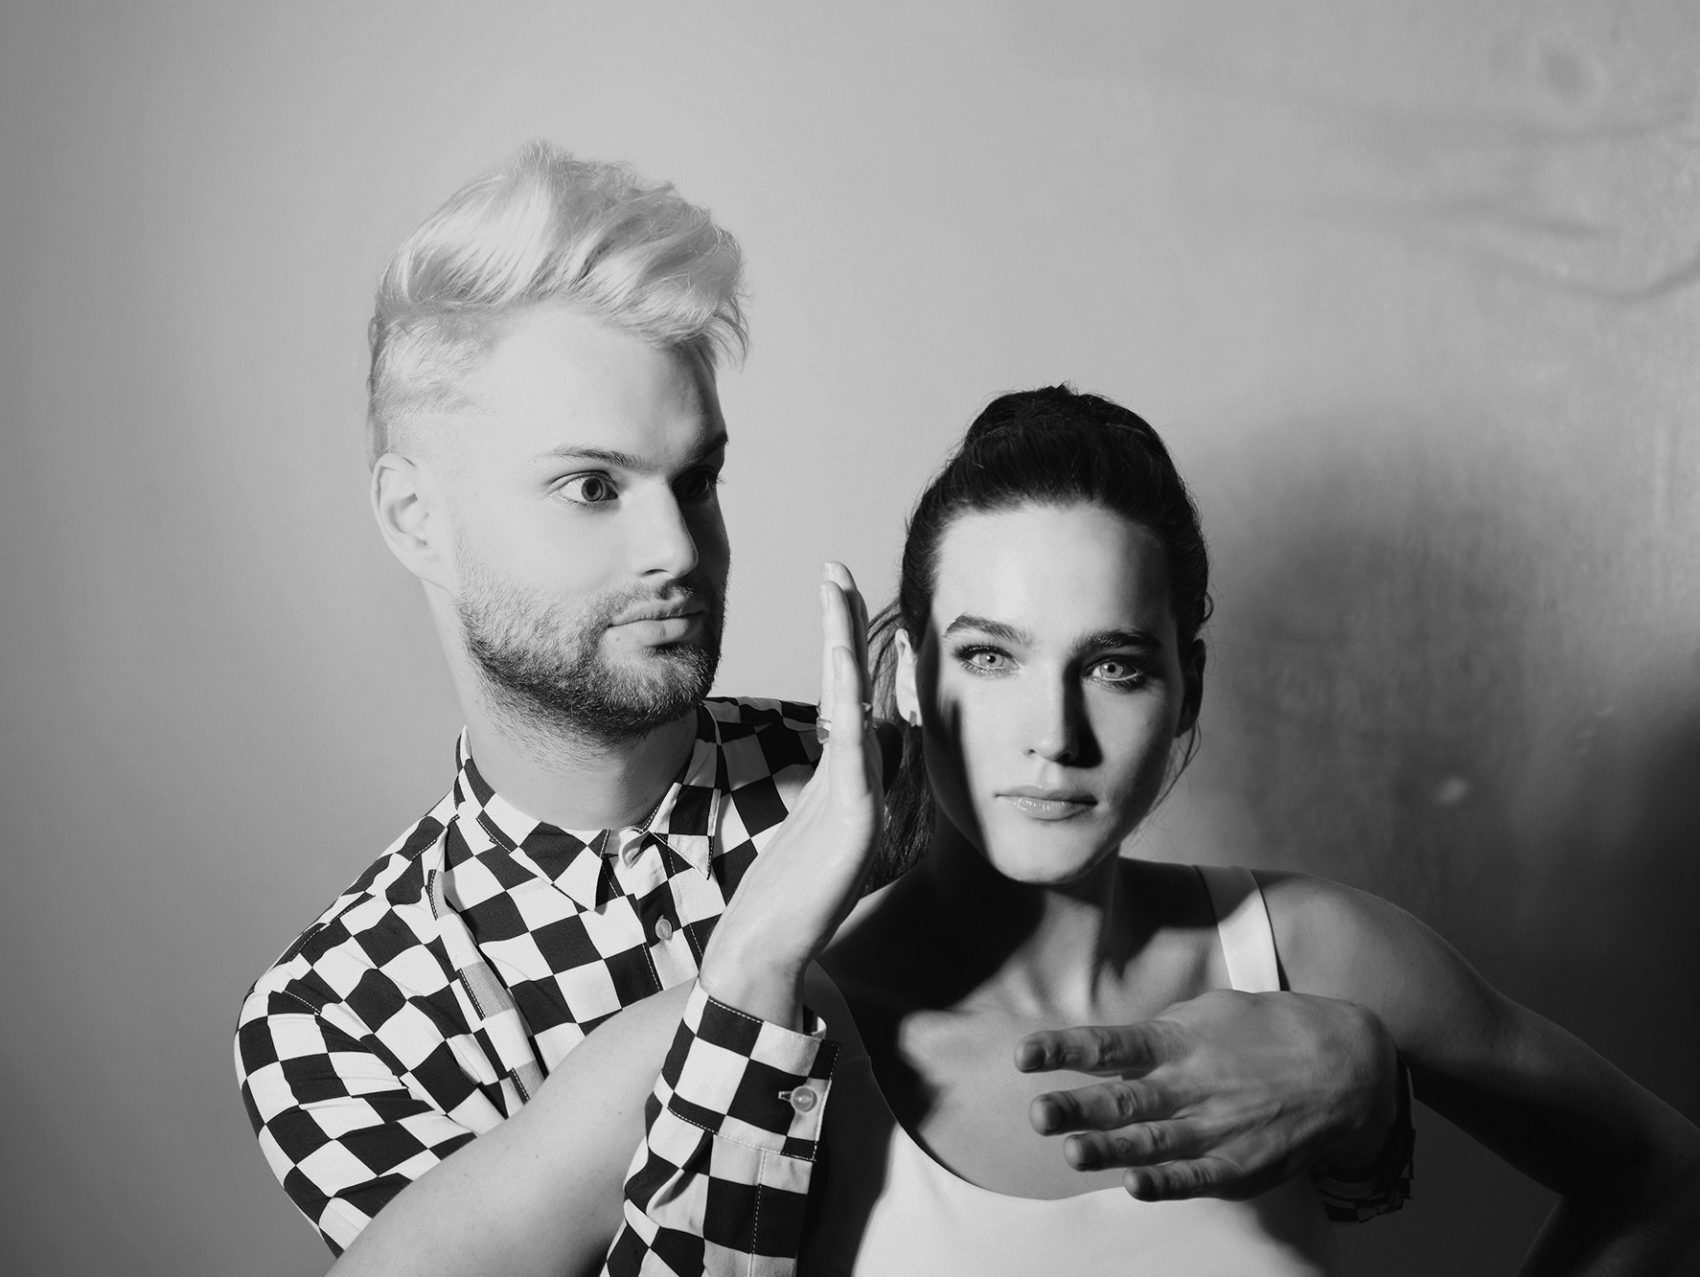 Sofi Tukker and the art of being together, apart.